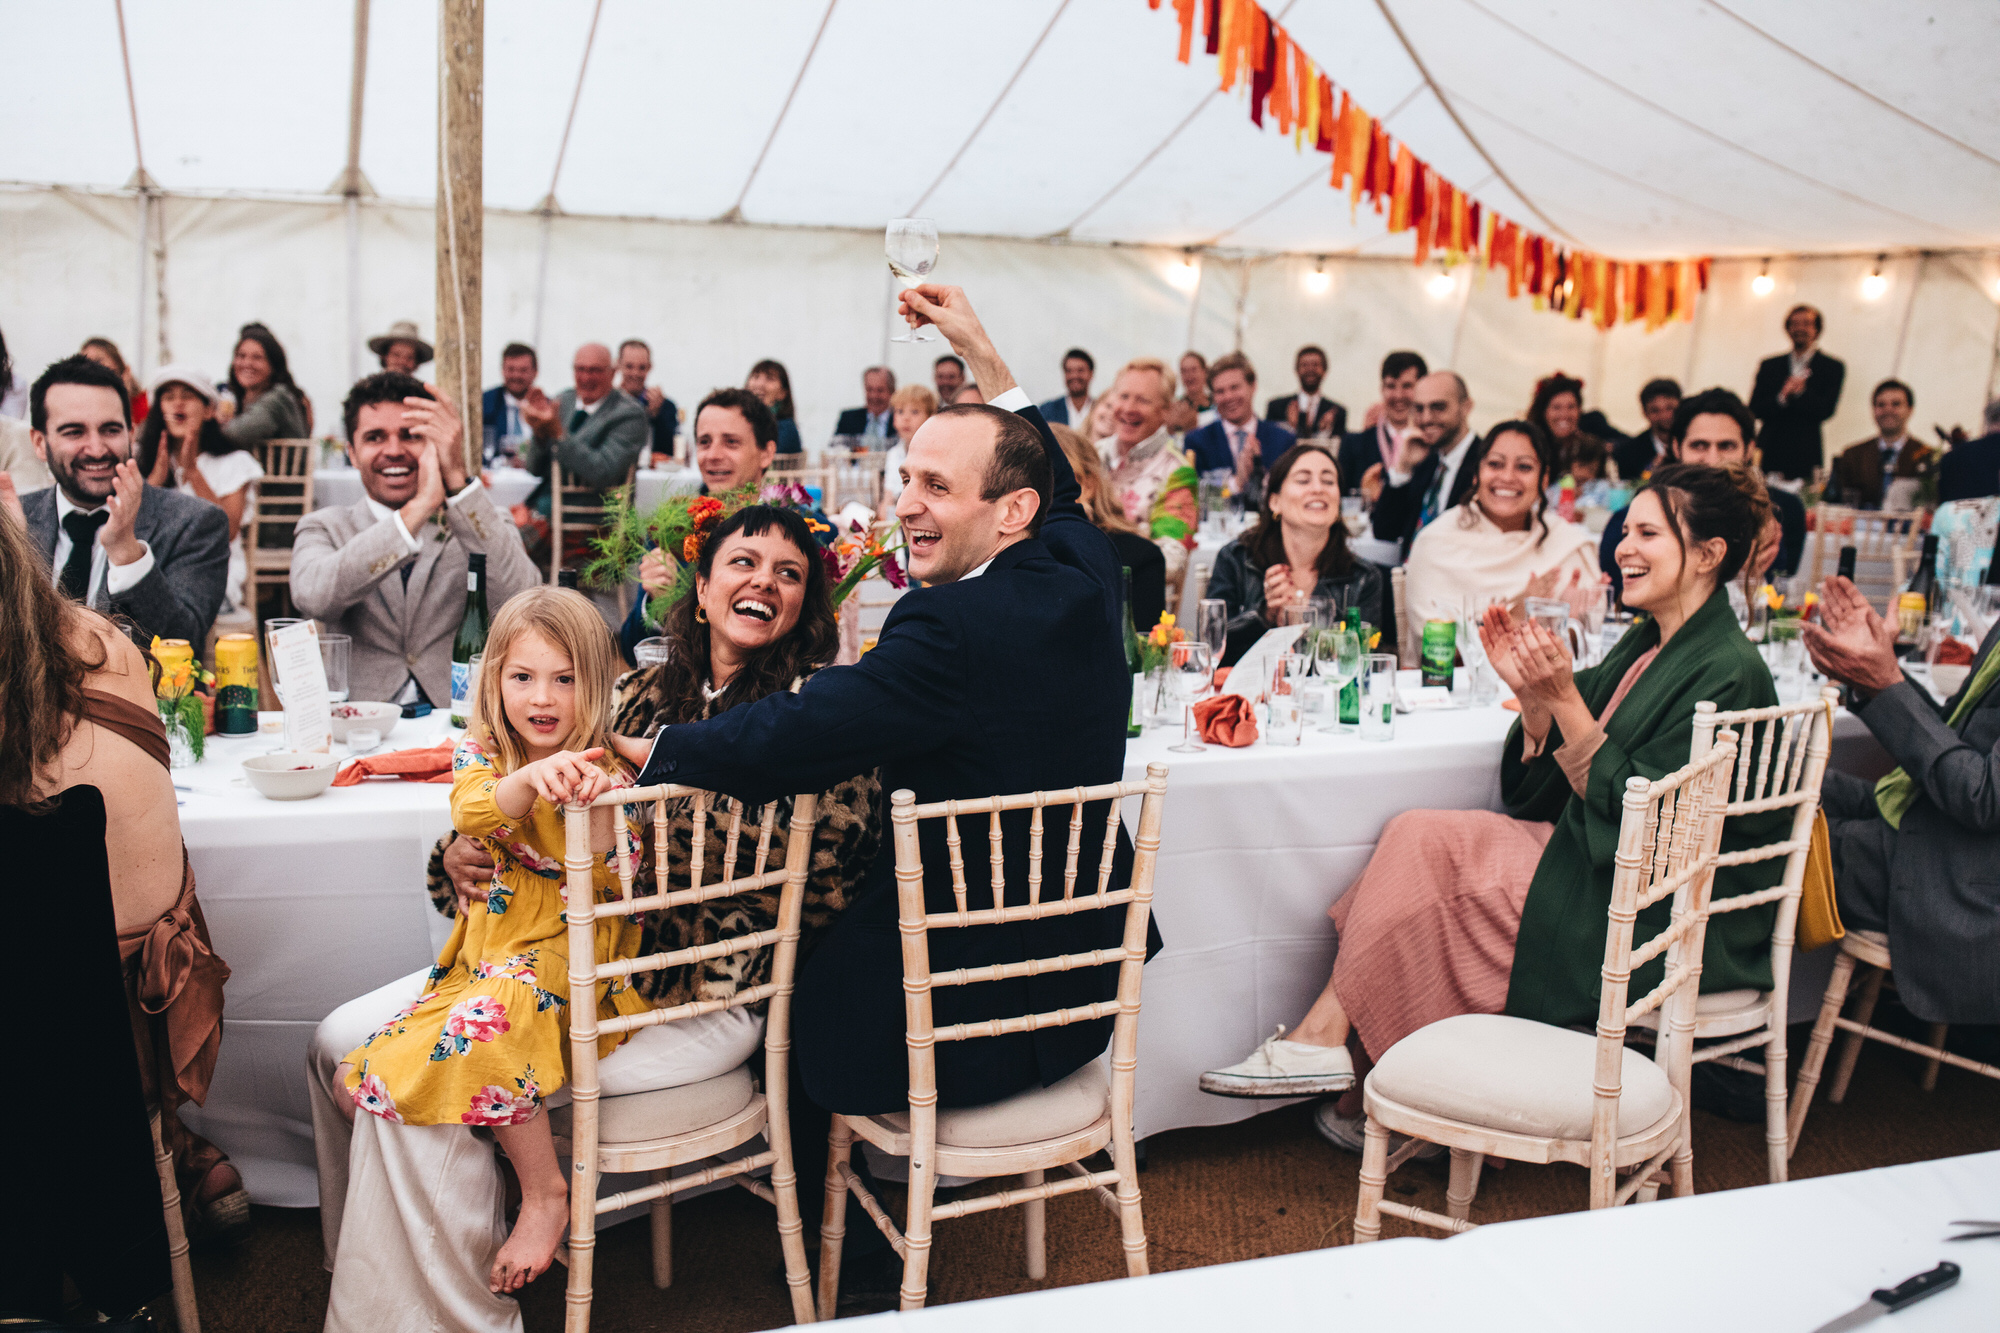 groom toasts with champagne surrounded by smiling clapping guests and bride